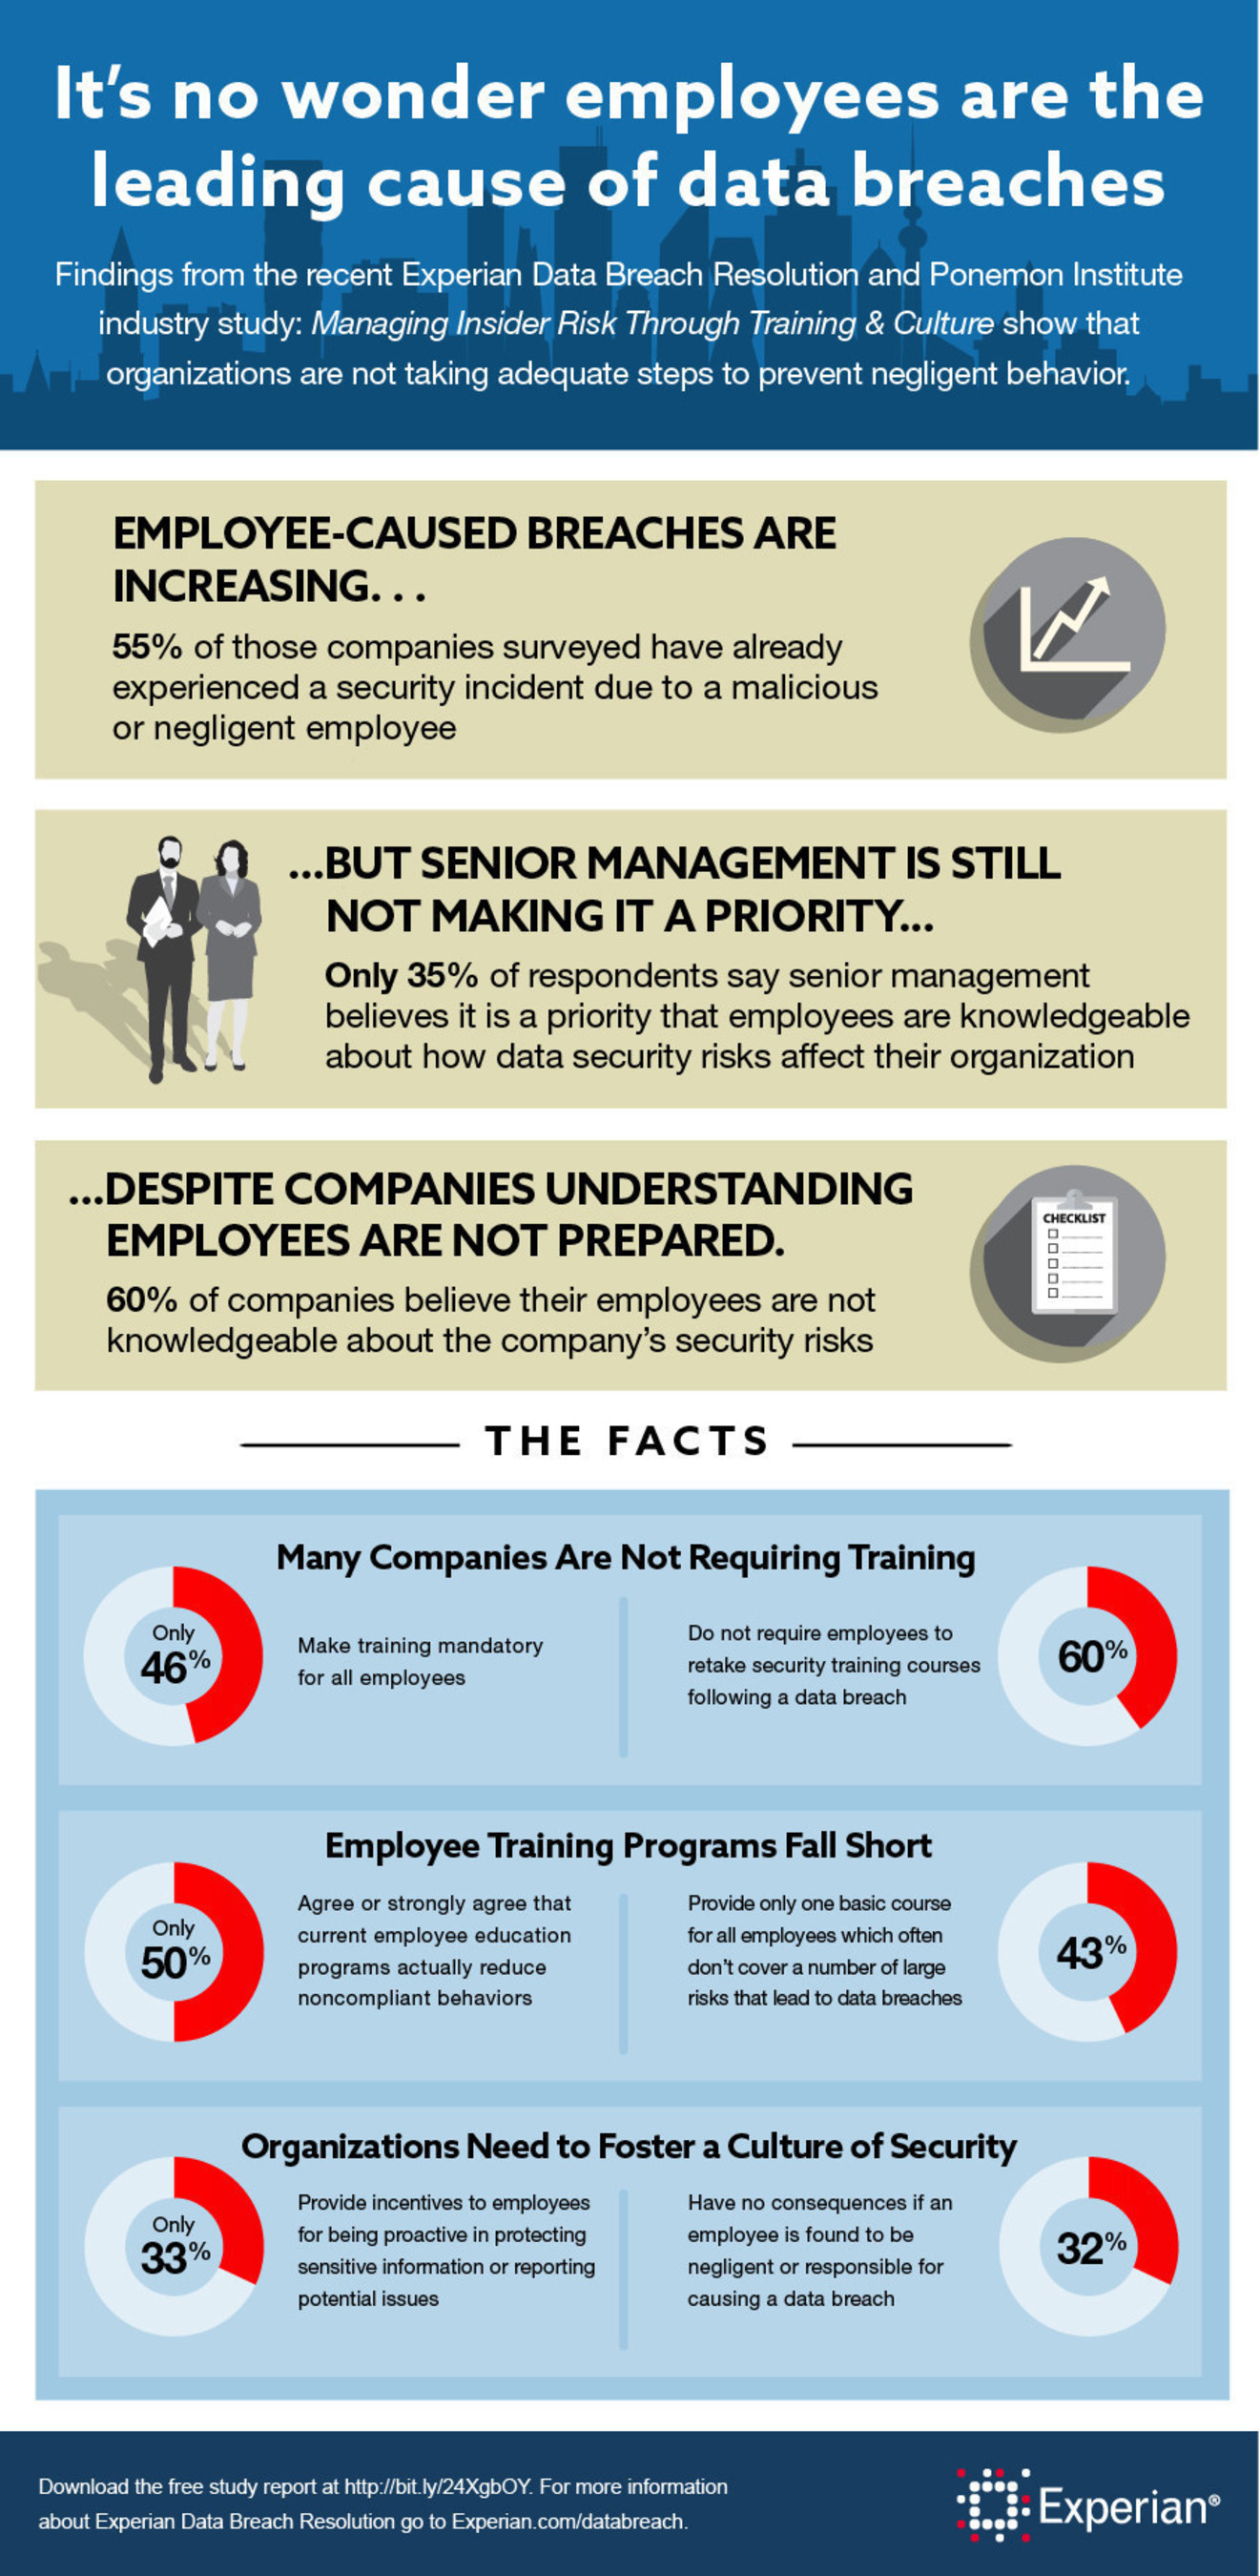 Experian Data Breach Resolution and Ponemon Institute study reveals organizations are not doing enough to prevent employee-caused security incidents.